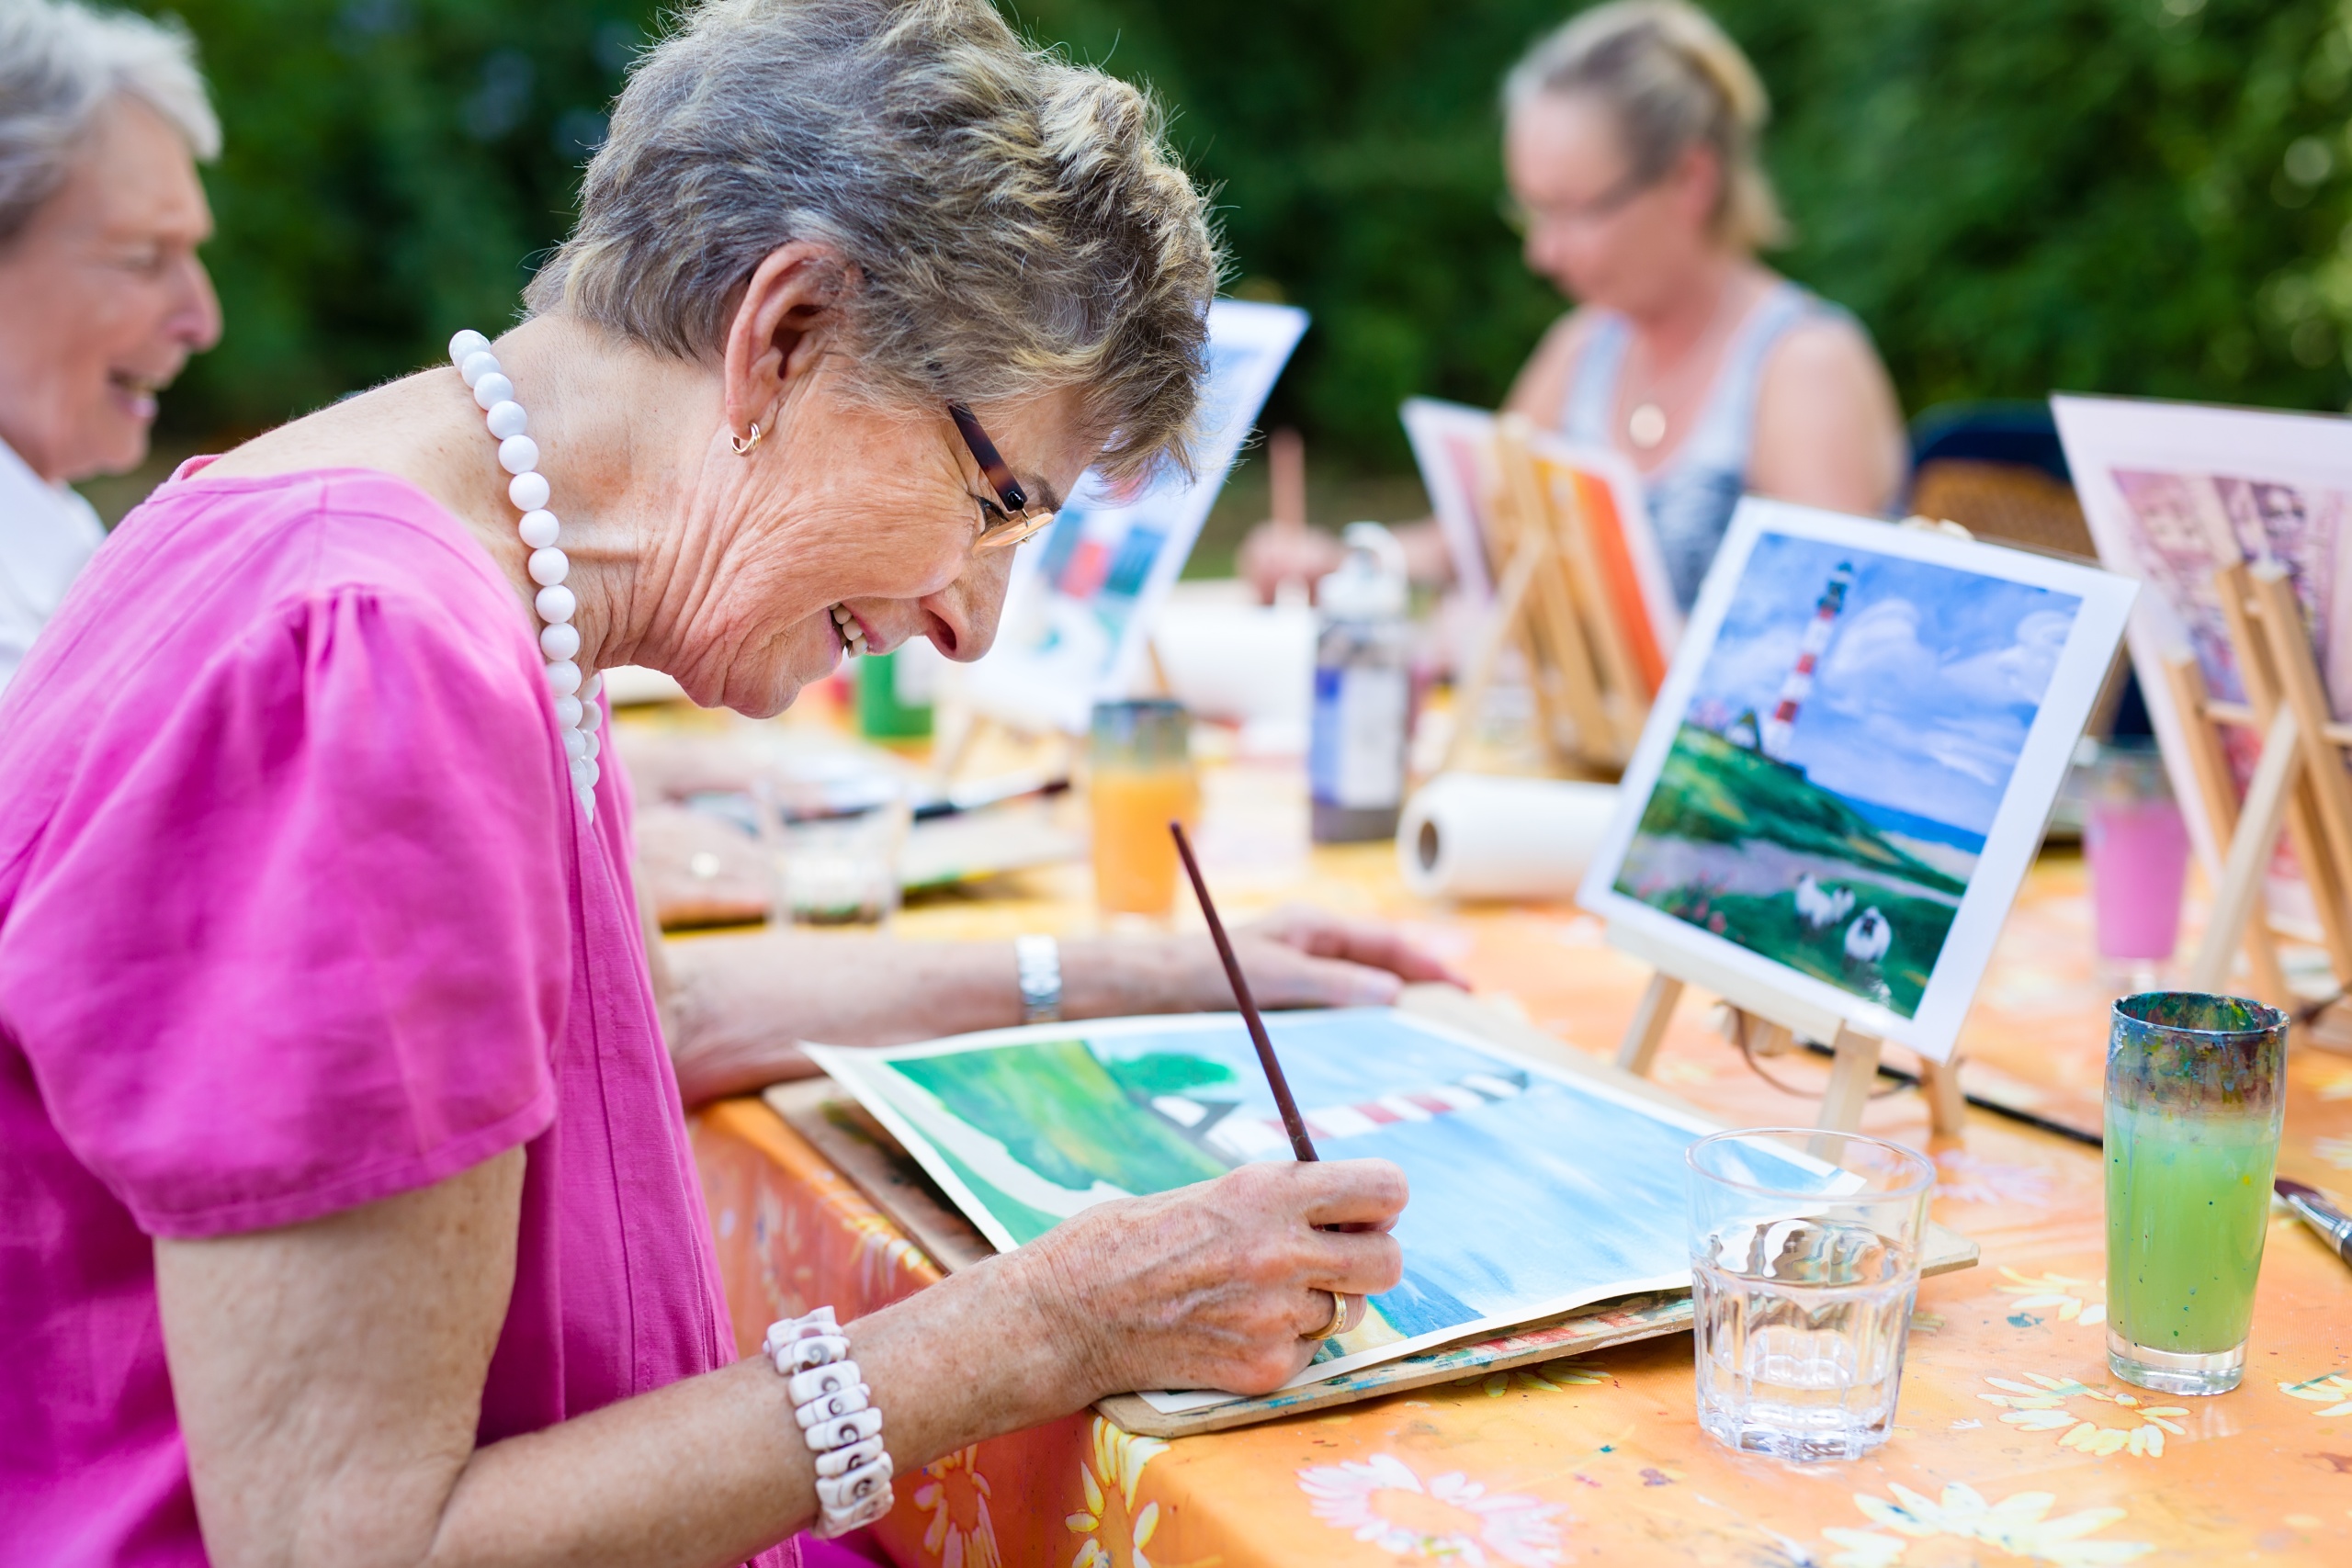 Senior woman participating in painting hobby.